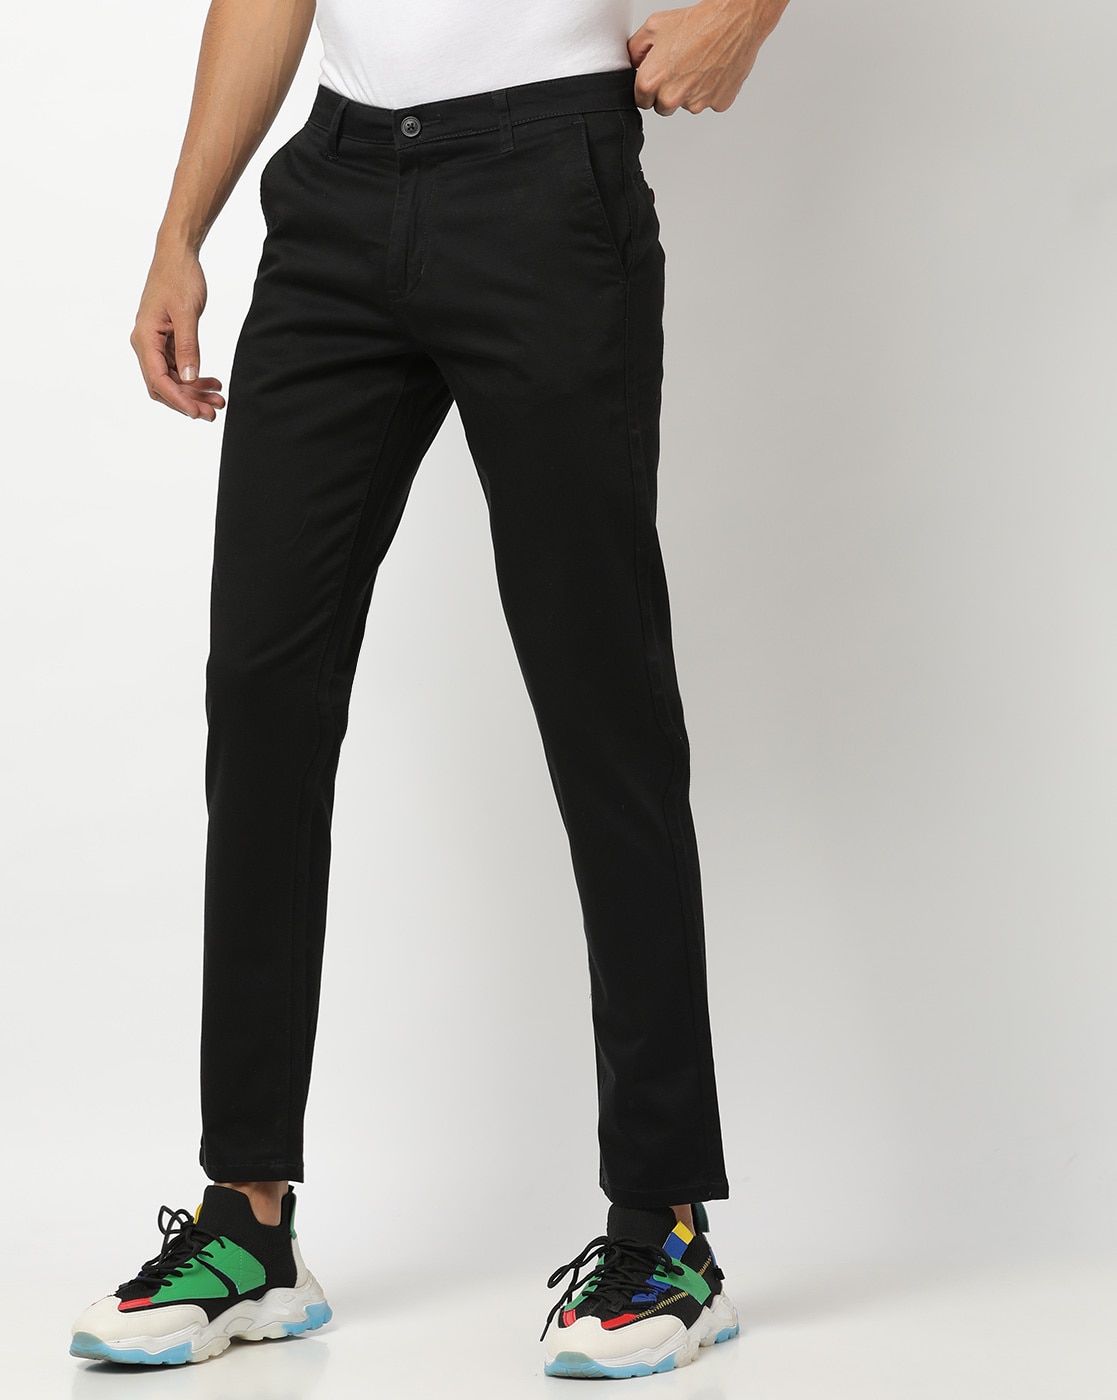 Buy Black Trousers & Pants for Men by CLUB CHINO Online 